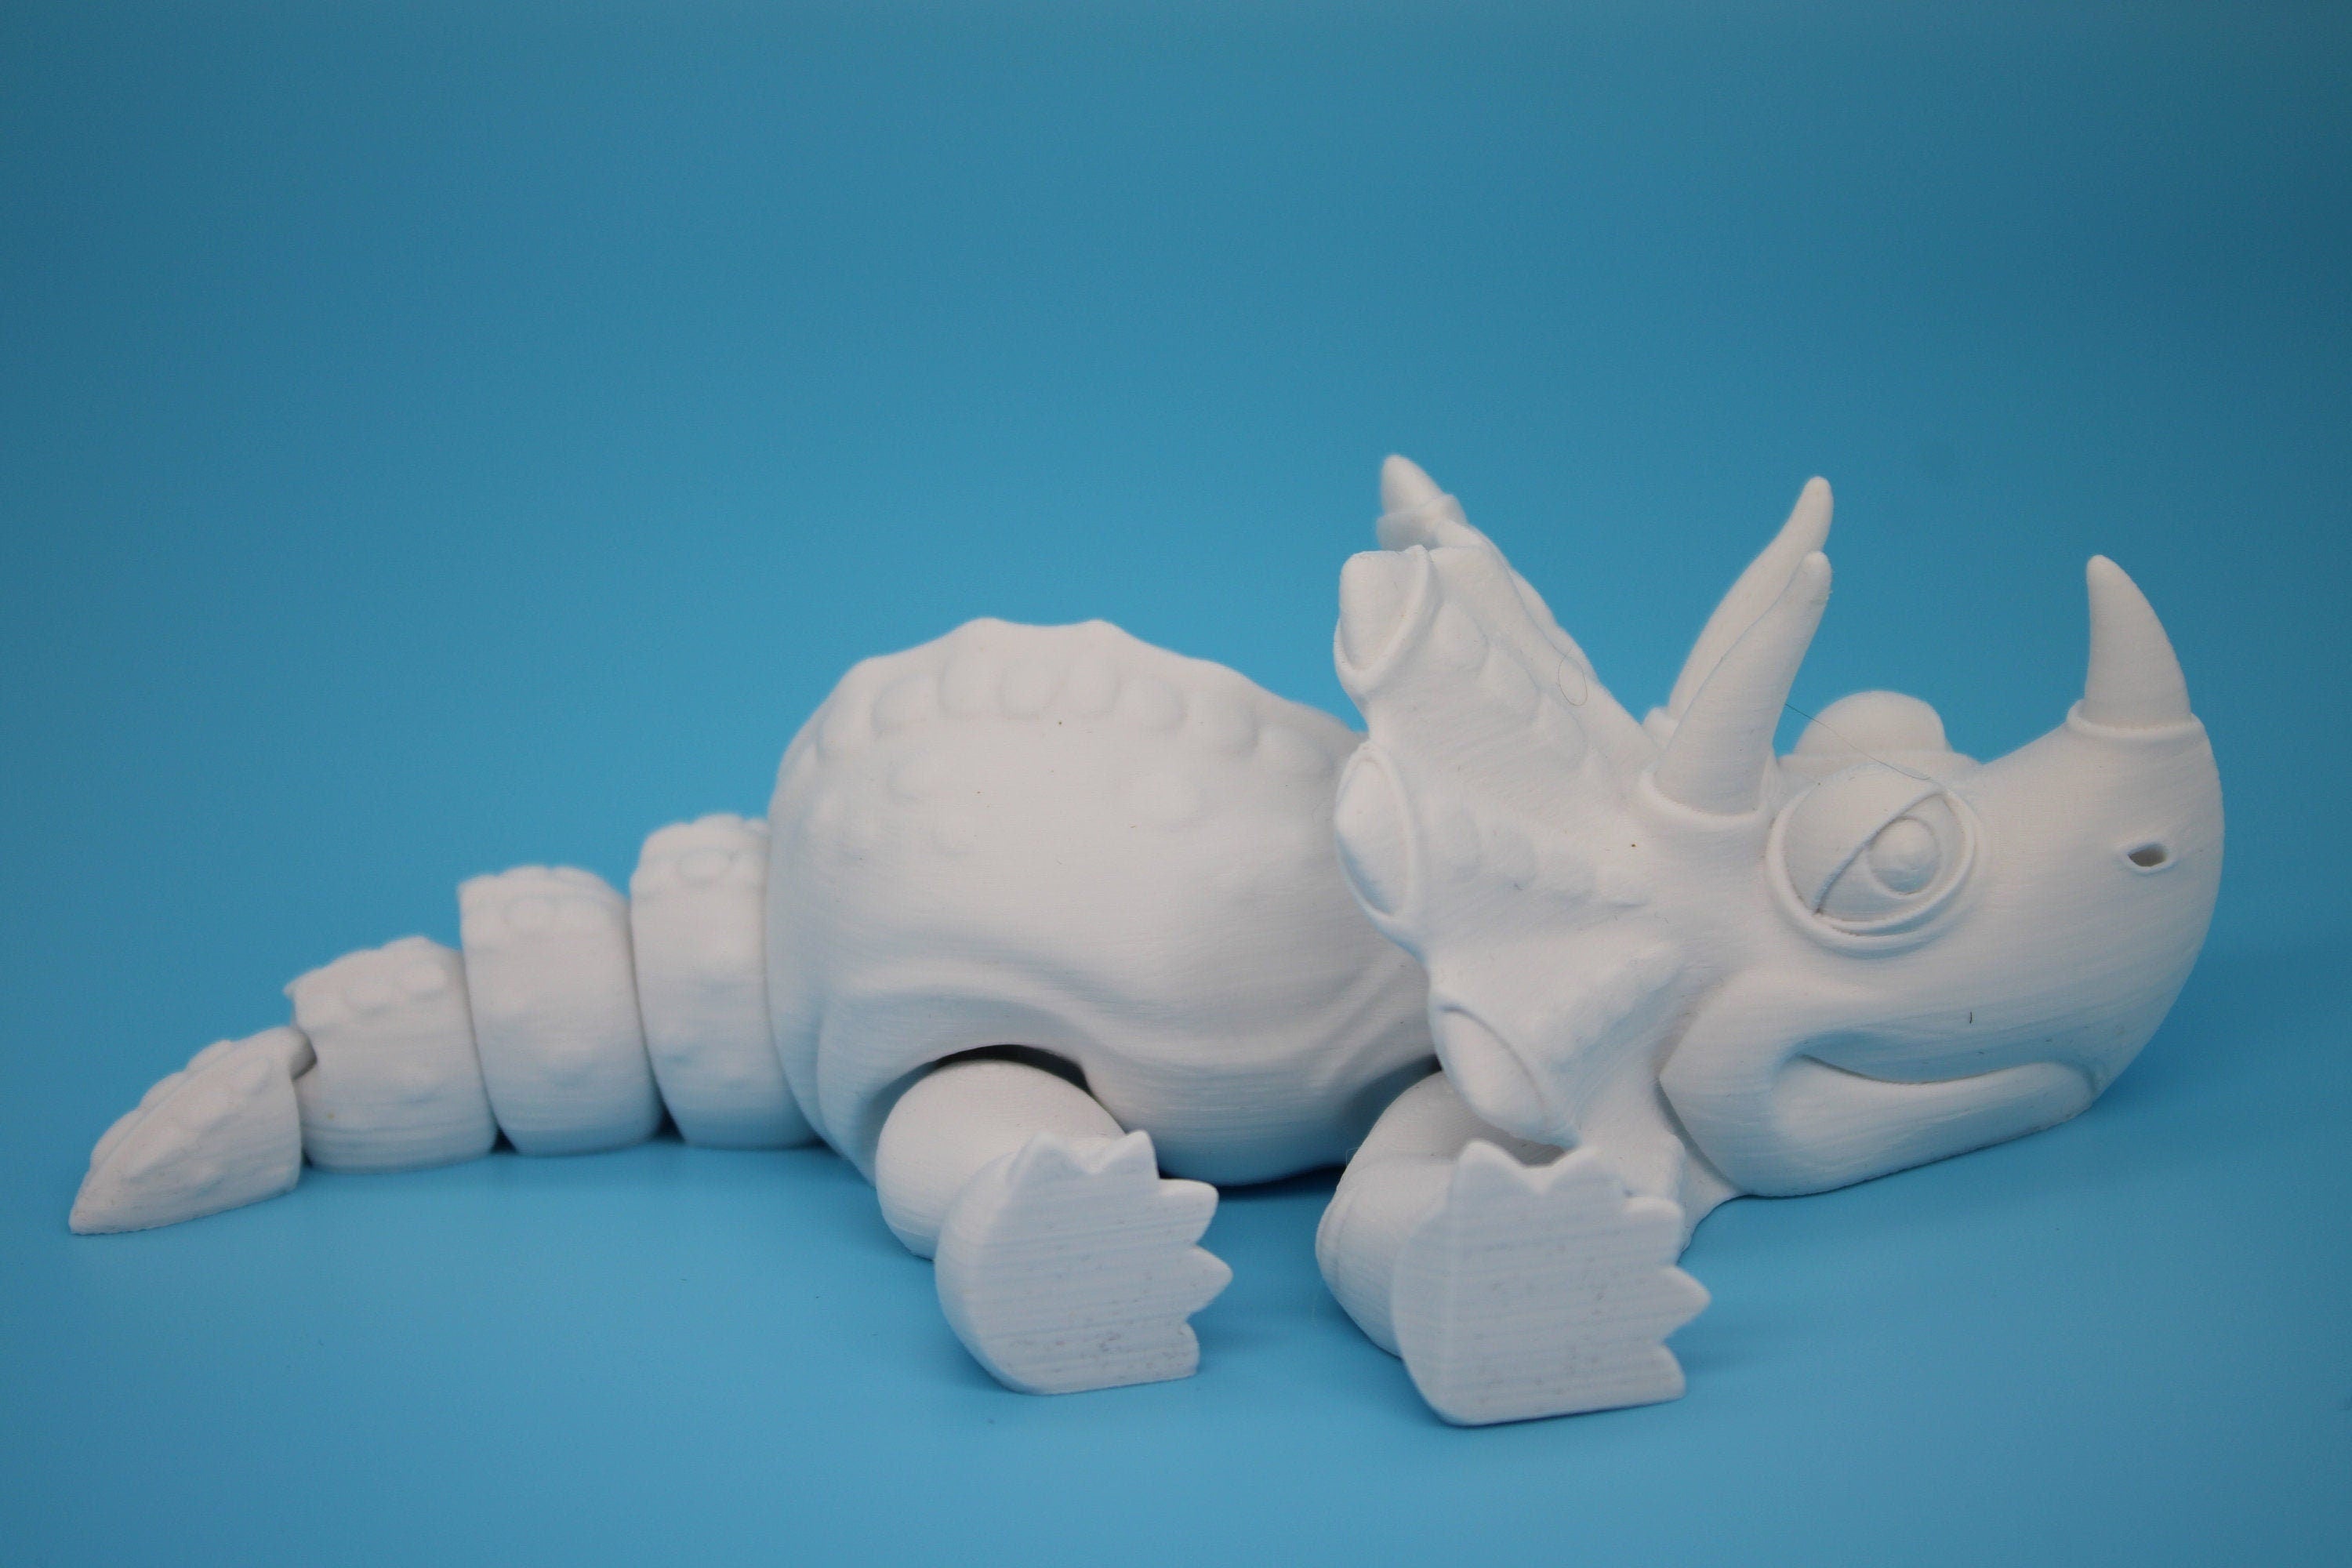 Cute Flexi White Triceratops. Unique 3D printed Triceratops. Great Articulating fidget toy, desk, sensory toy. 6.5 inch